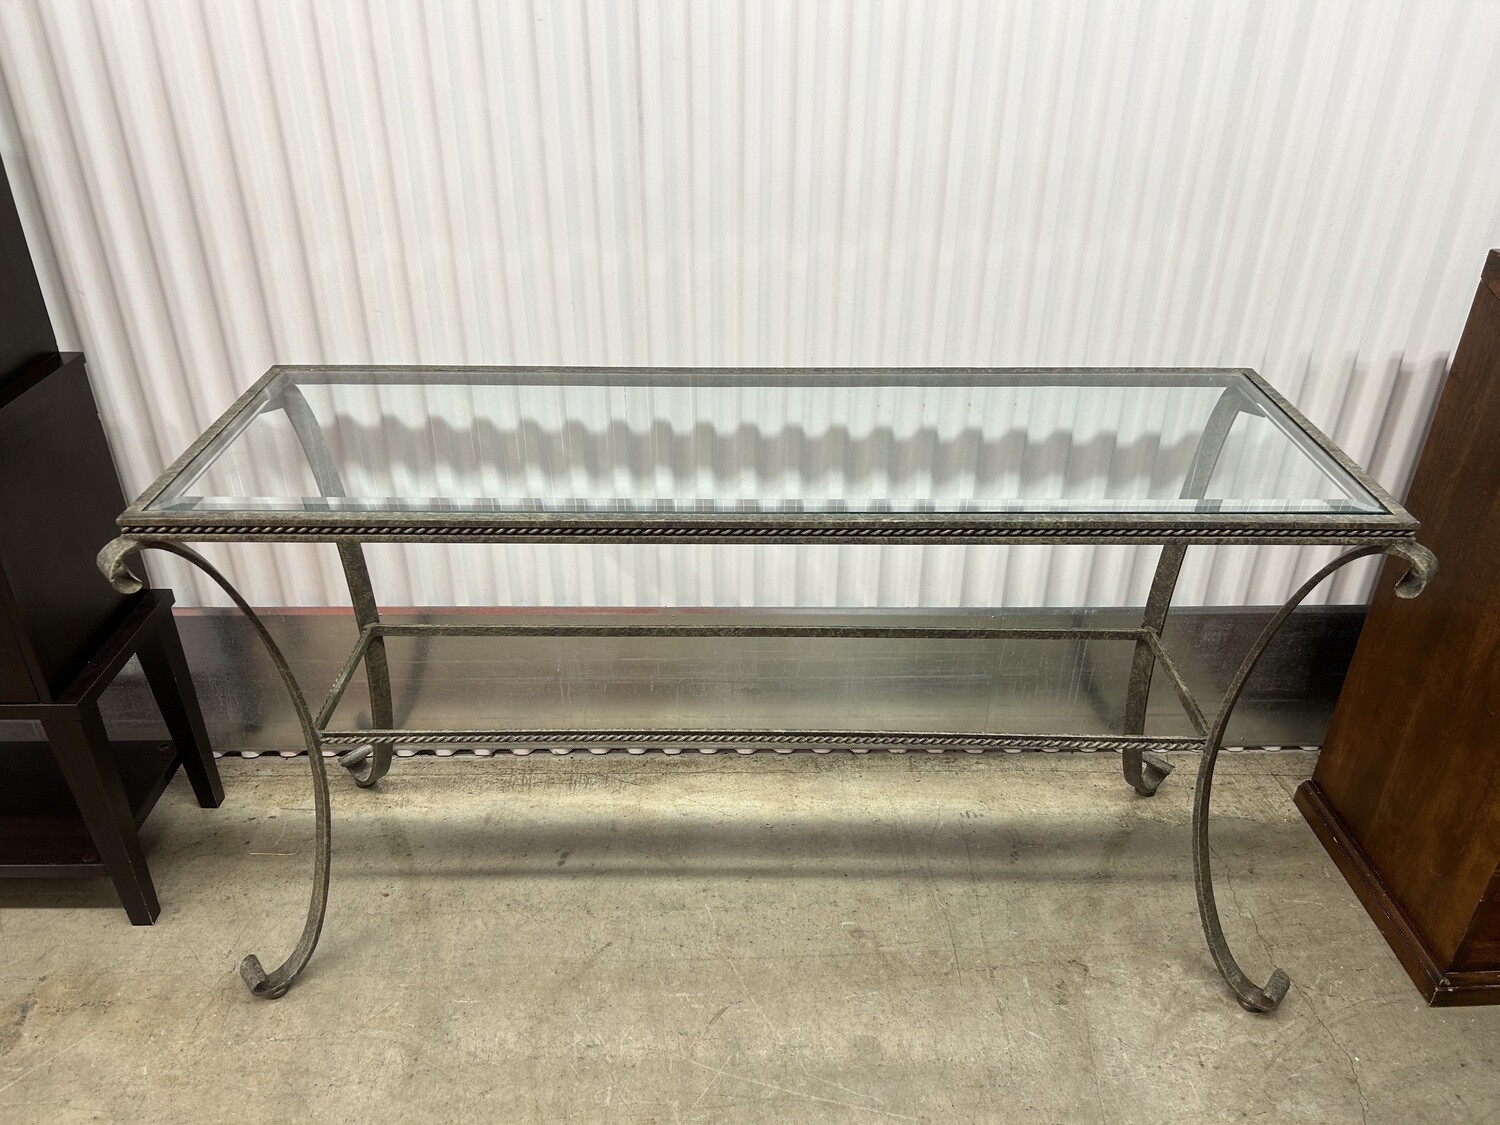 Silver-green Metal Console / Sofa Table #2126 ** 6 mos. to sell, 50% off